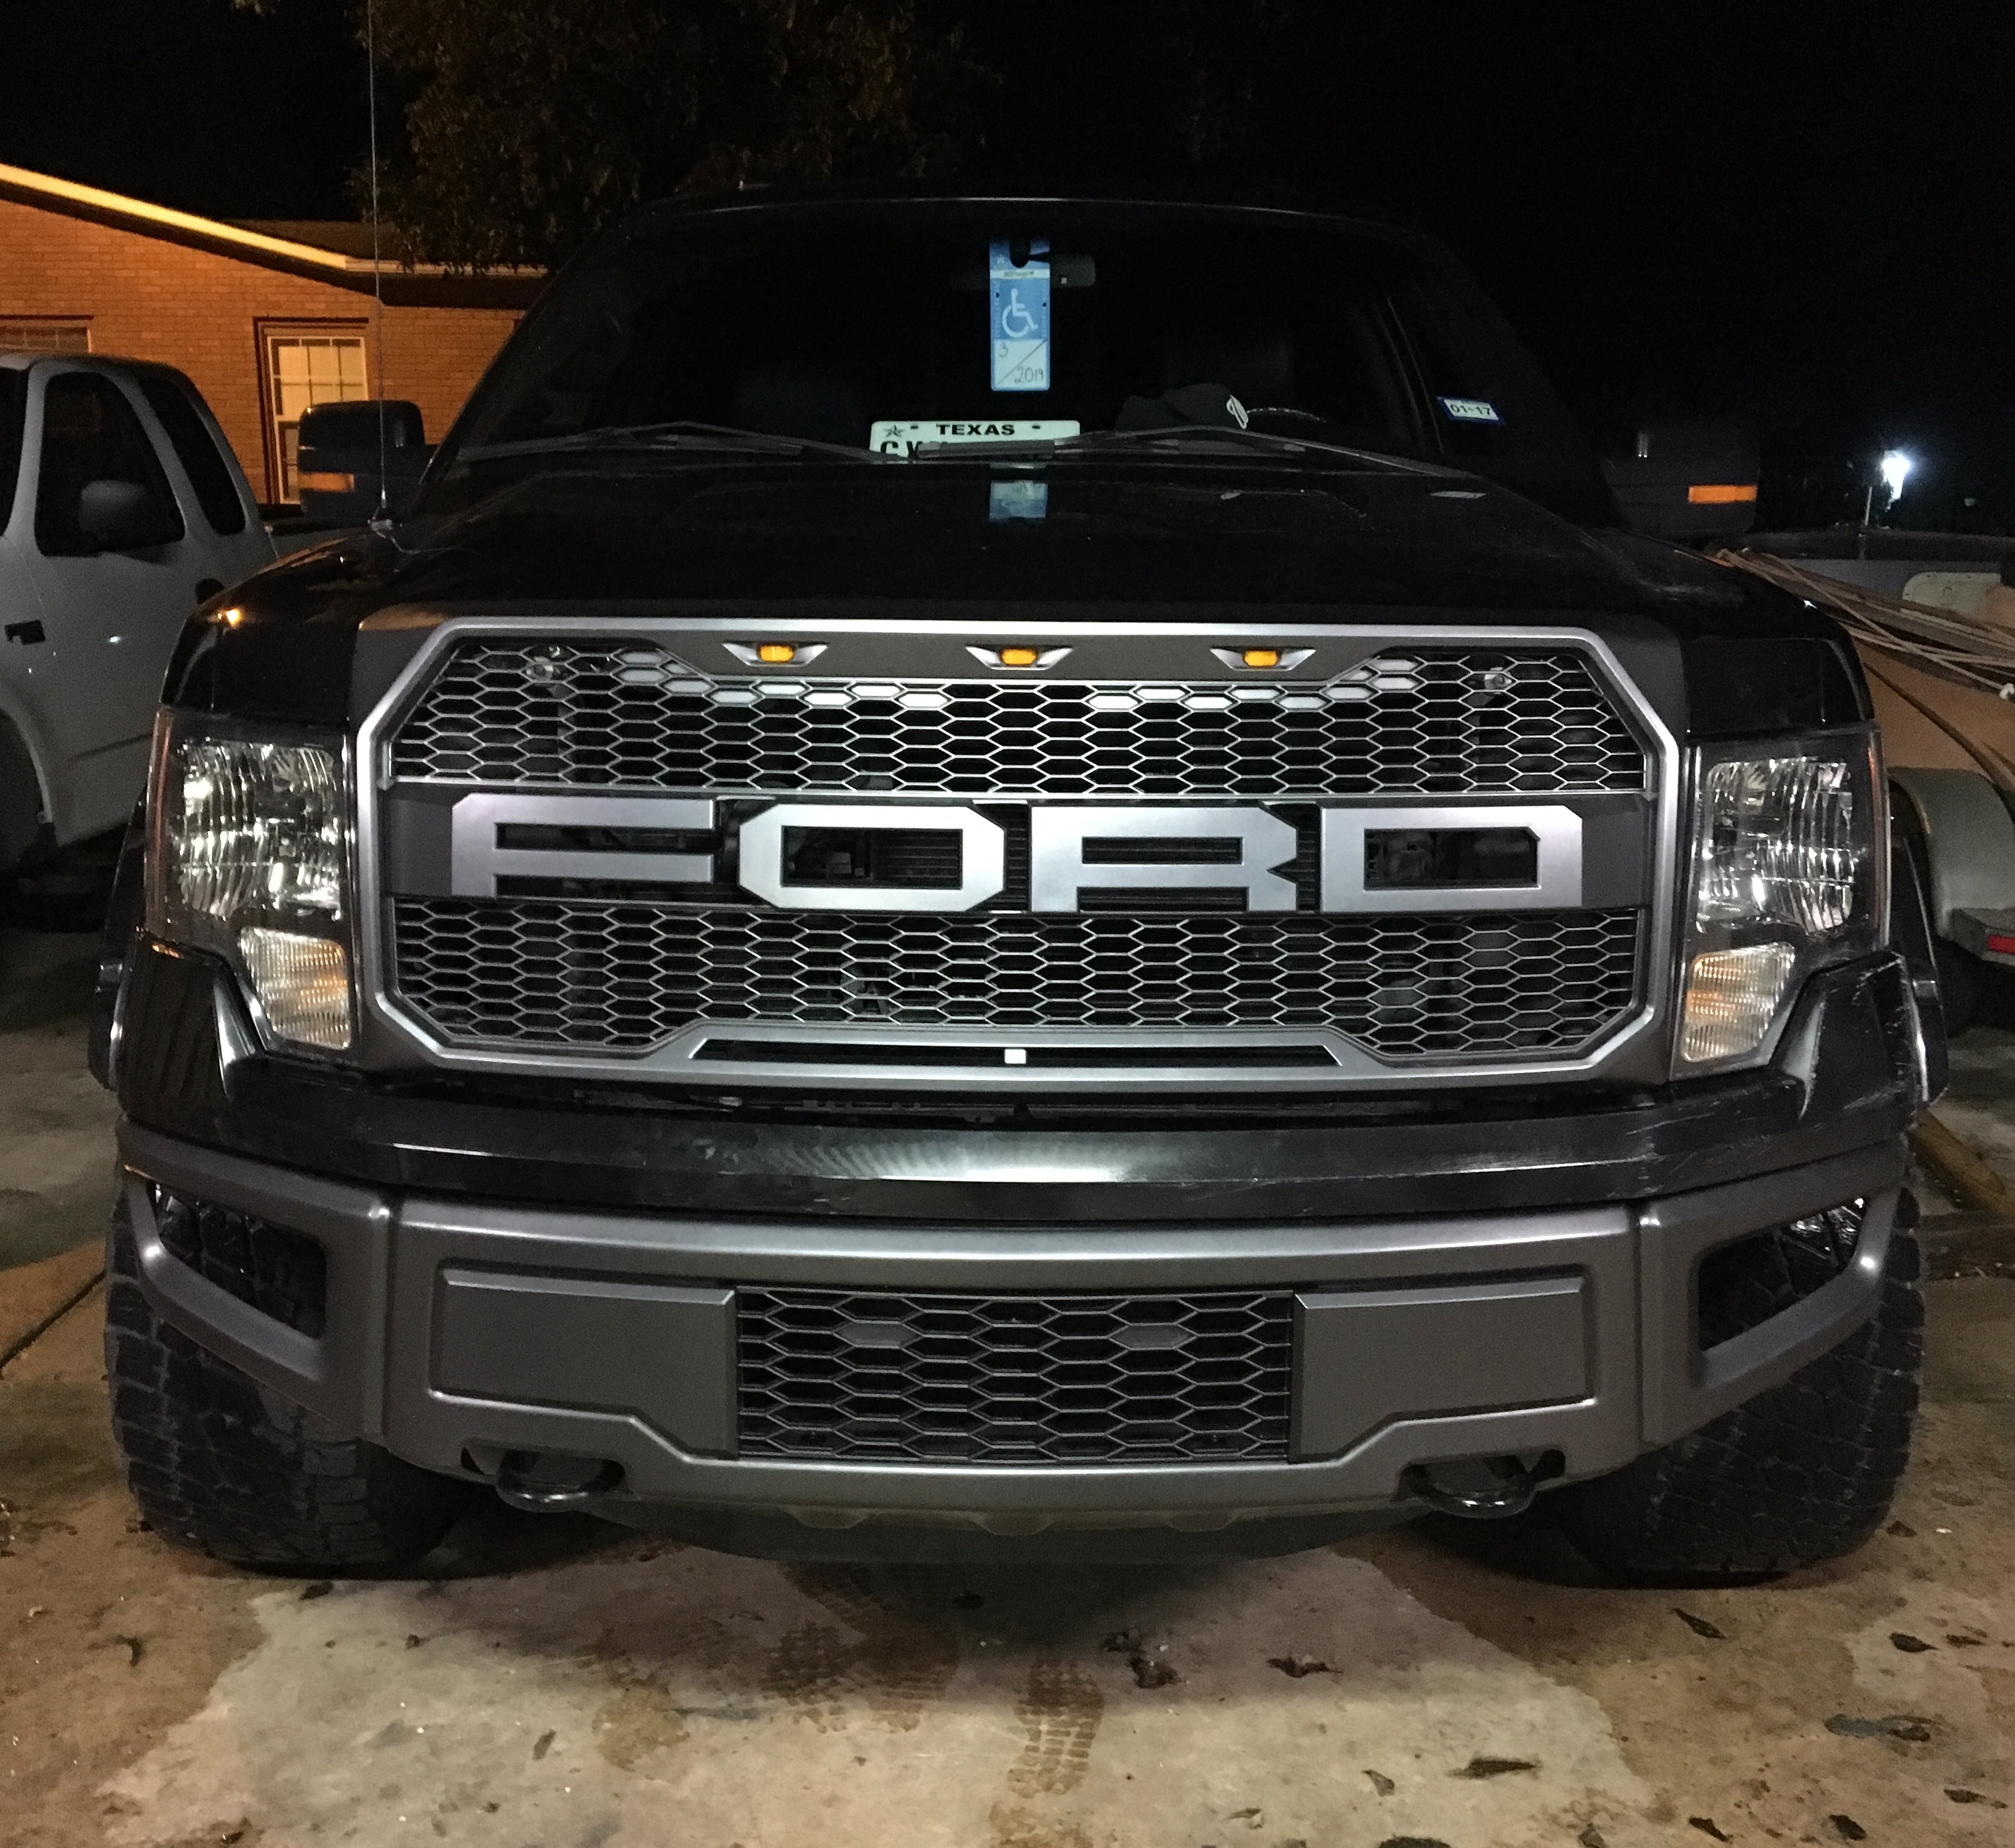 2017 Raptor Grille Installed Today - Page 42 - Ford F150 ...